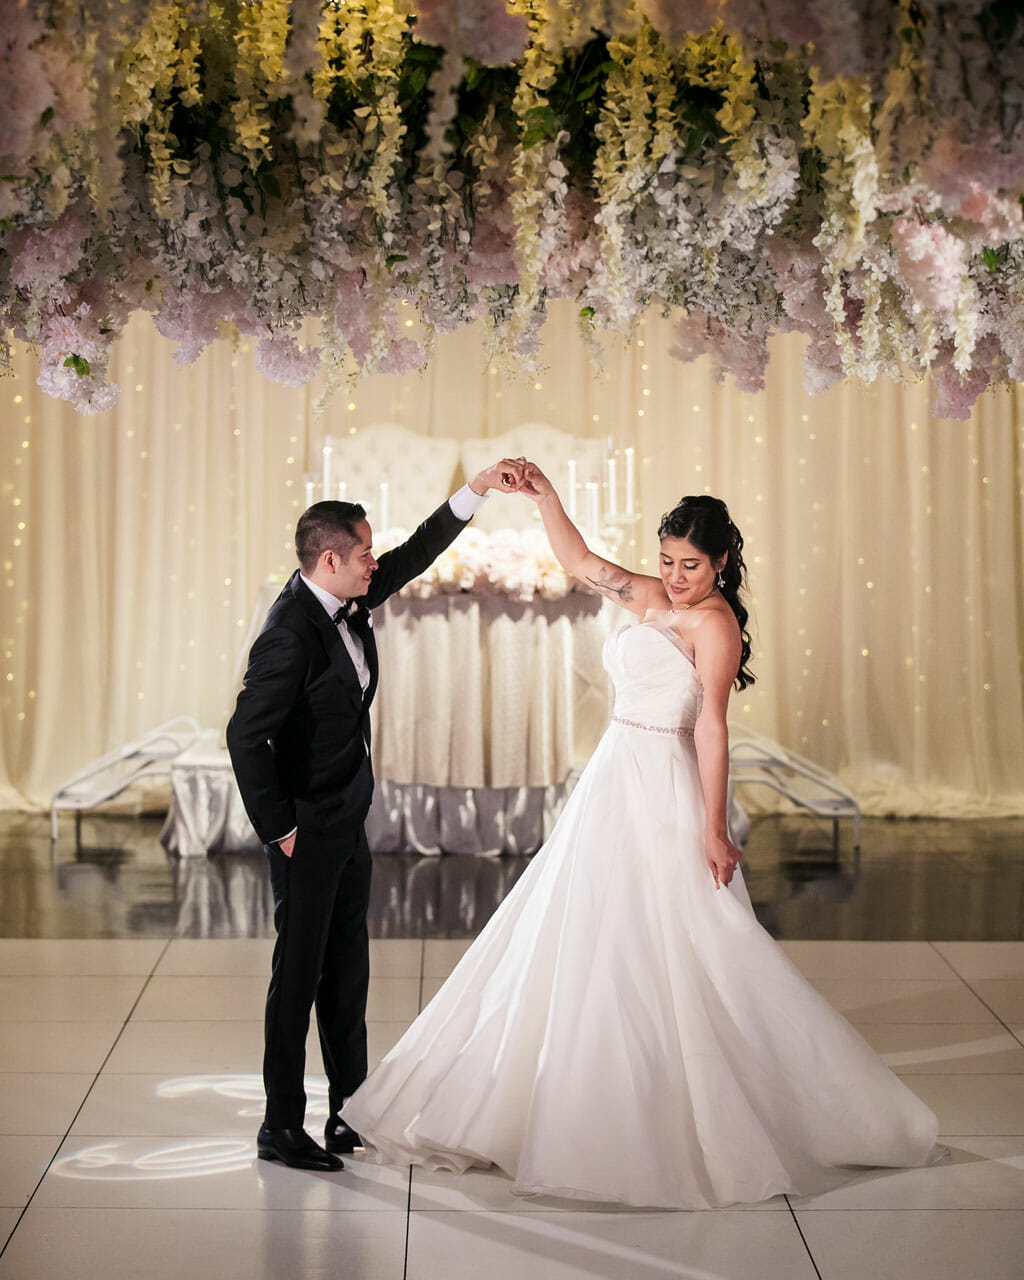 first dance under a canopy of flowers from a wedding at noor banquet hall in los angeles